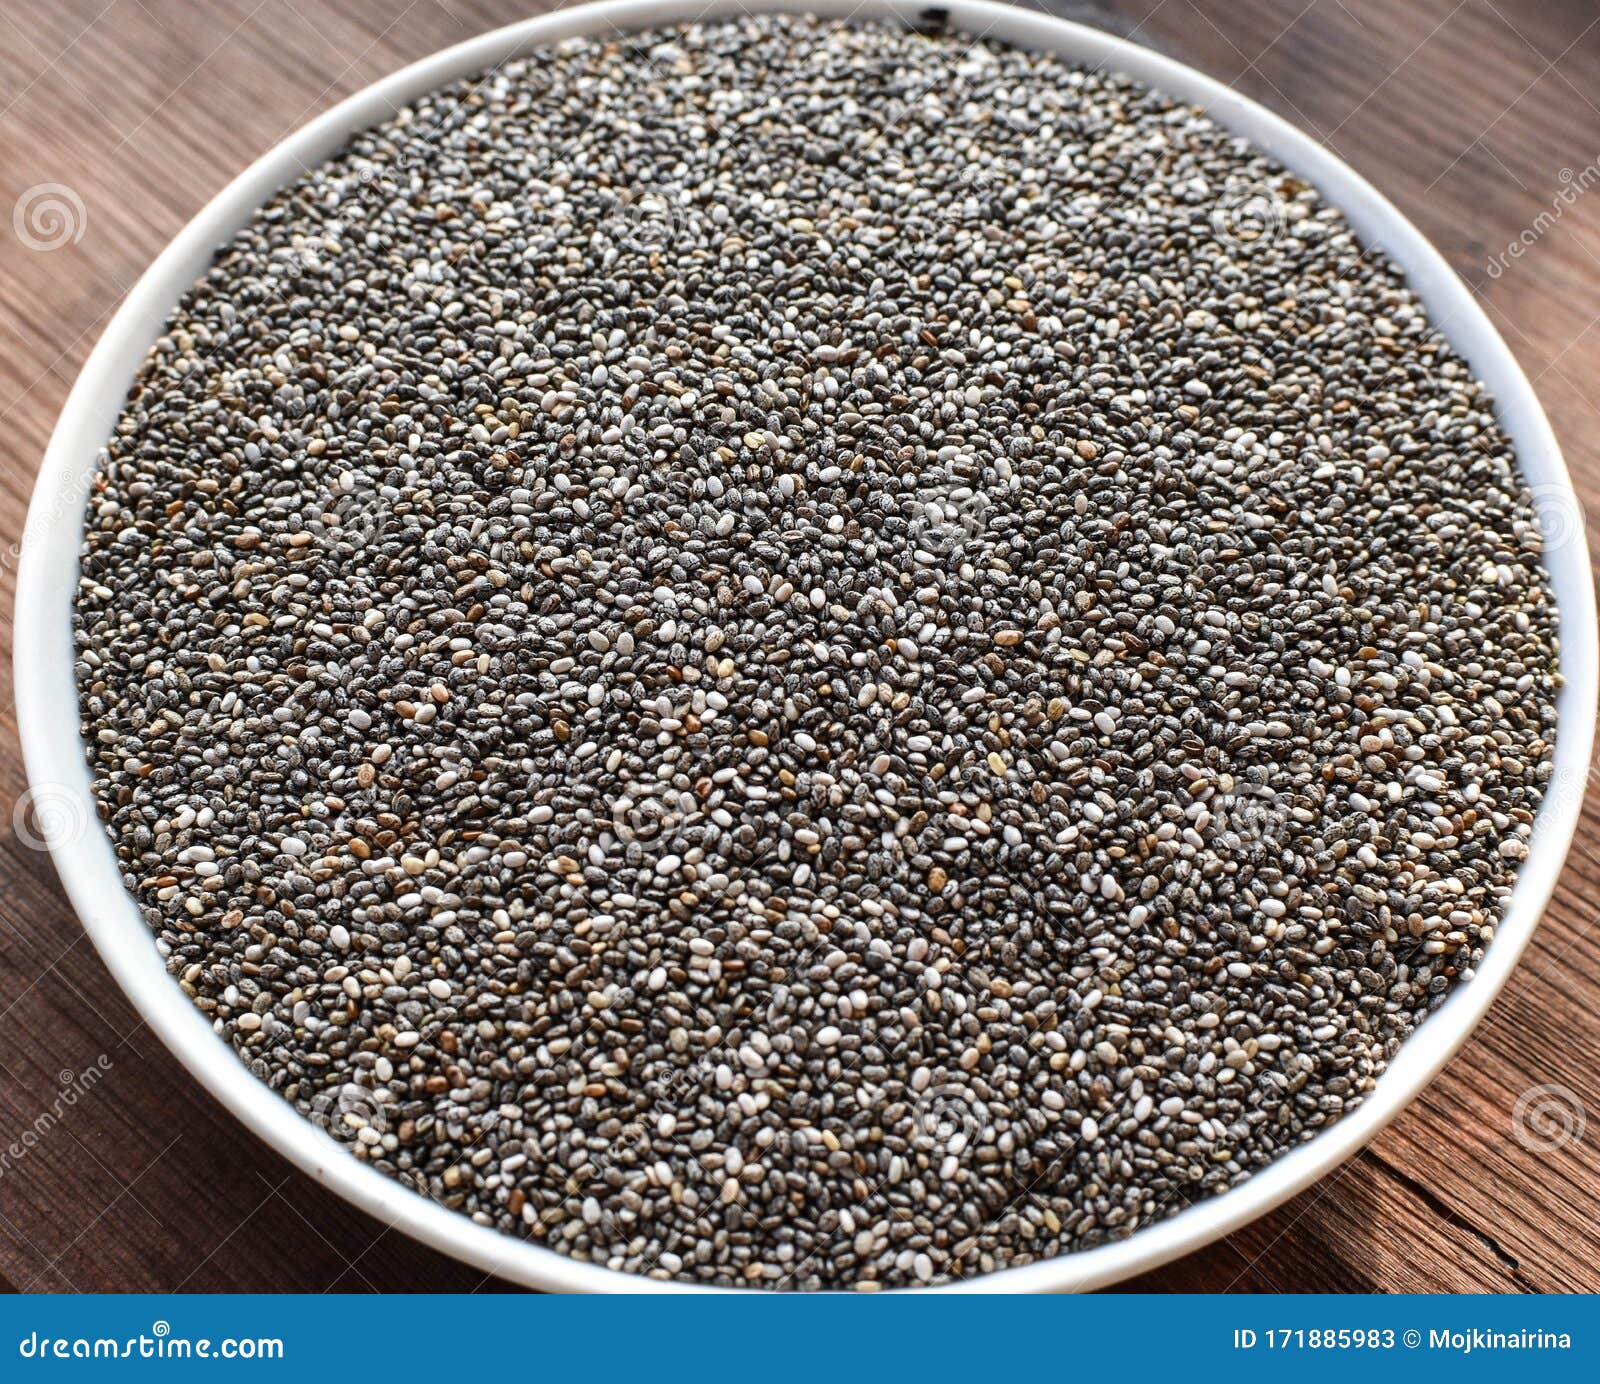 in the home country of chia, in south america, the seeds of spanish sage began to be consumed about five millennia ago. chia seeds